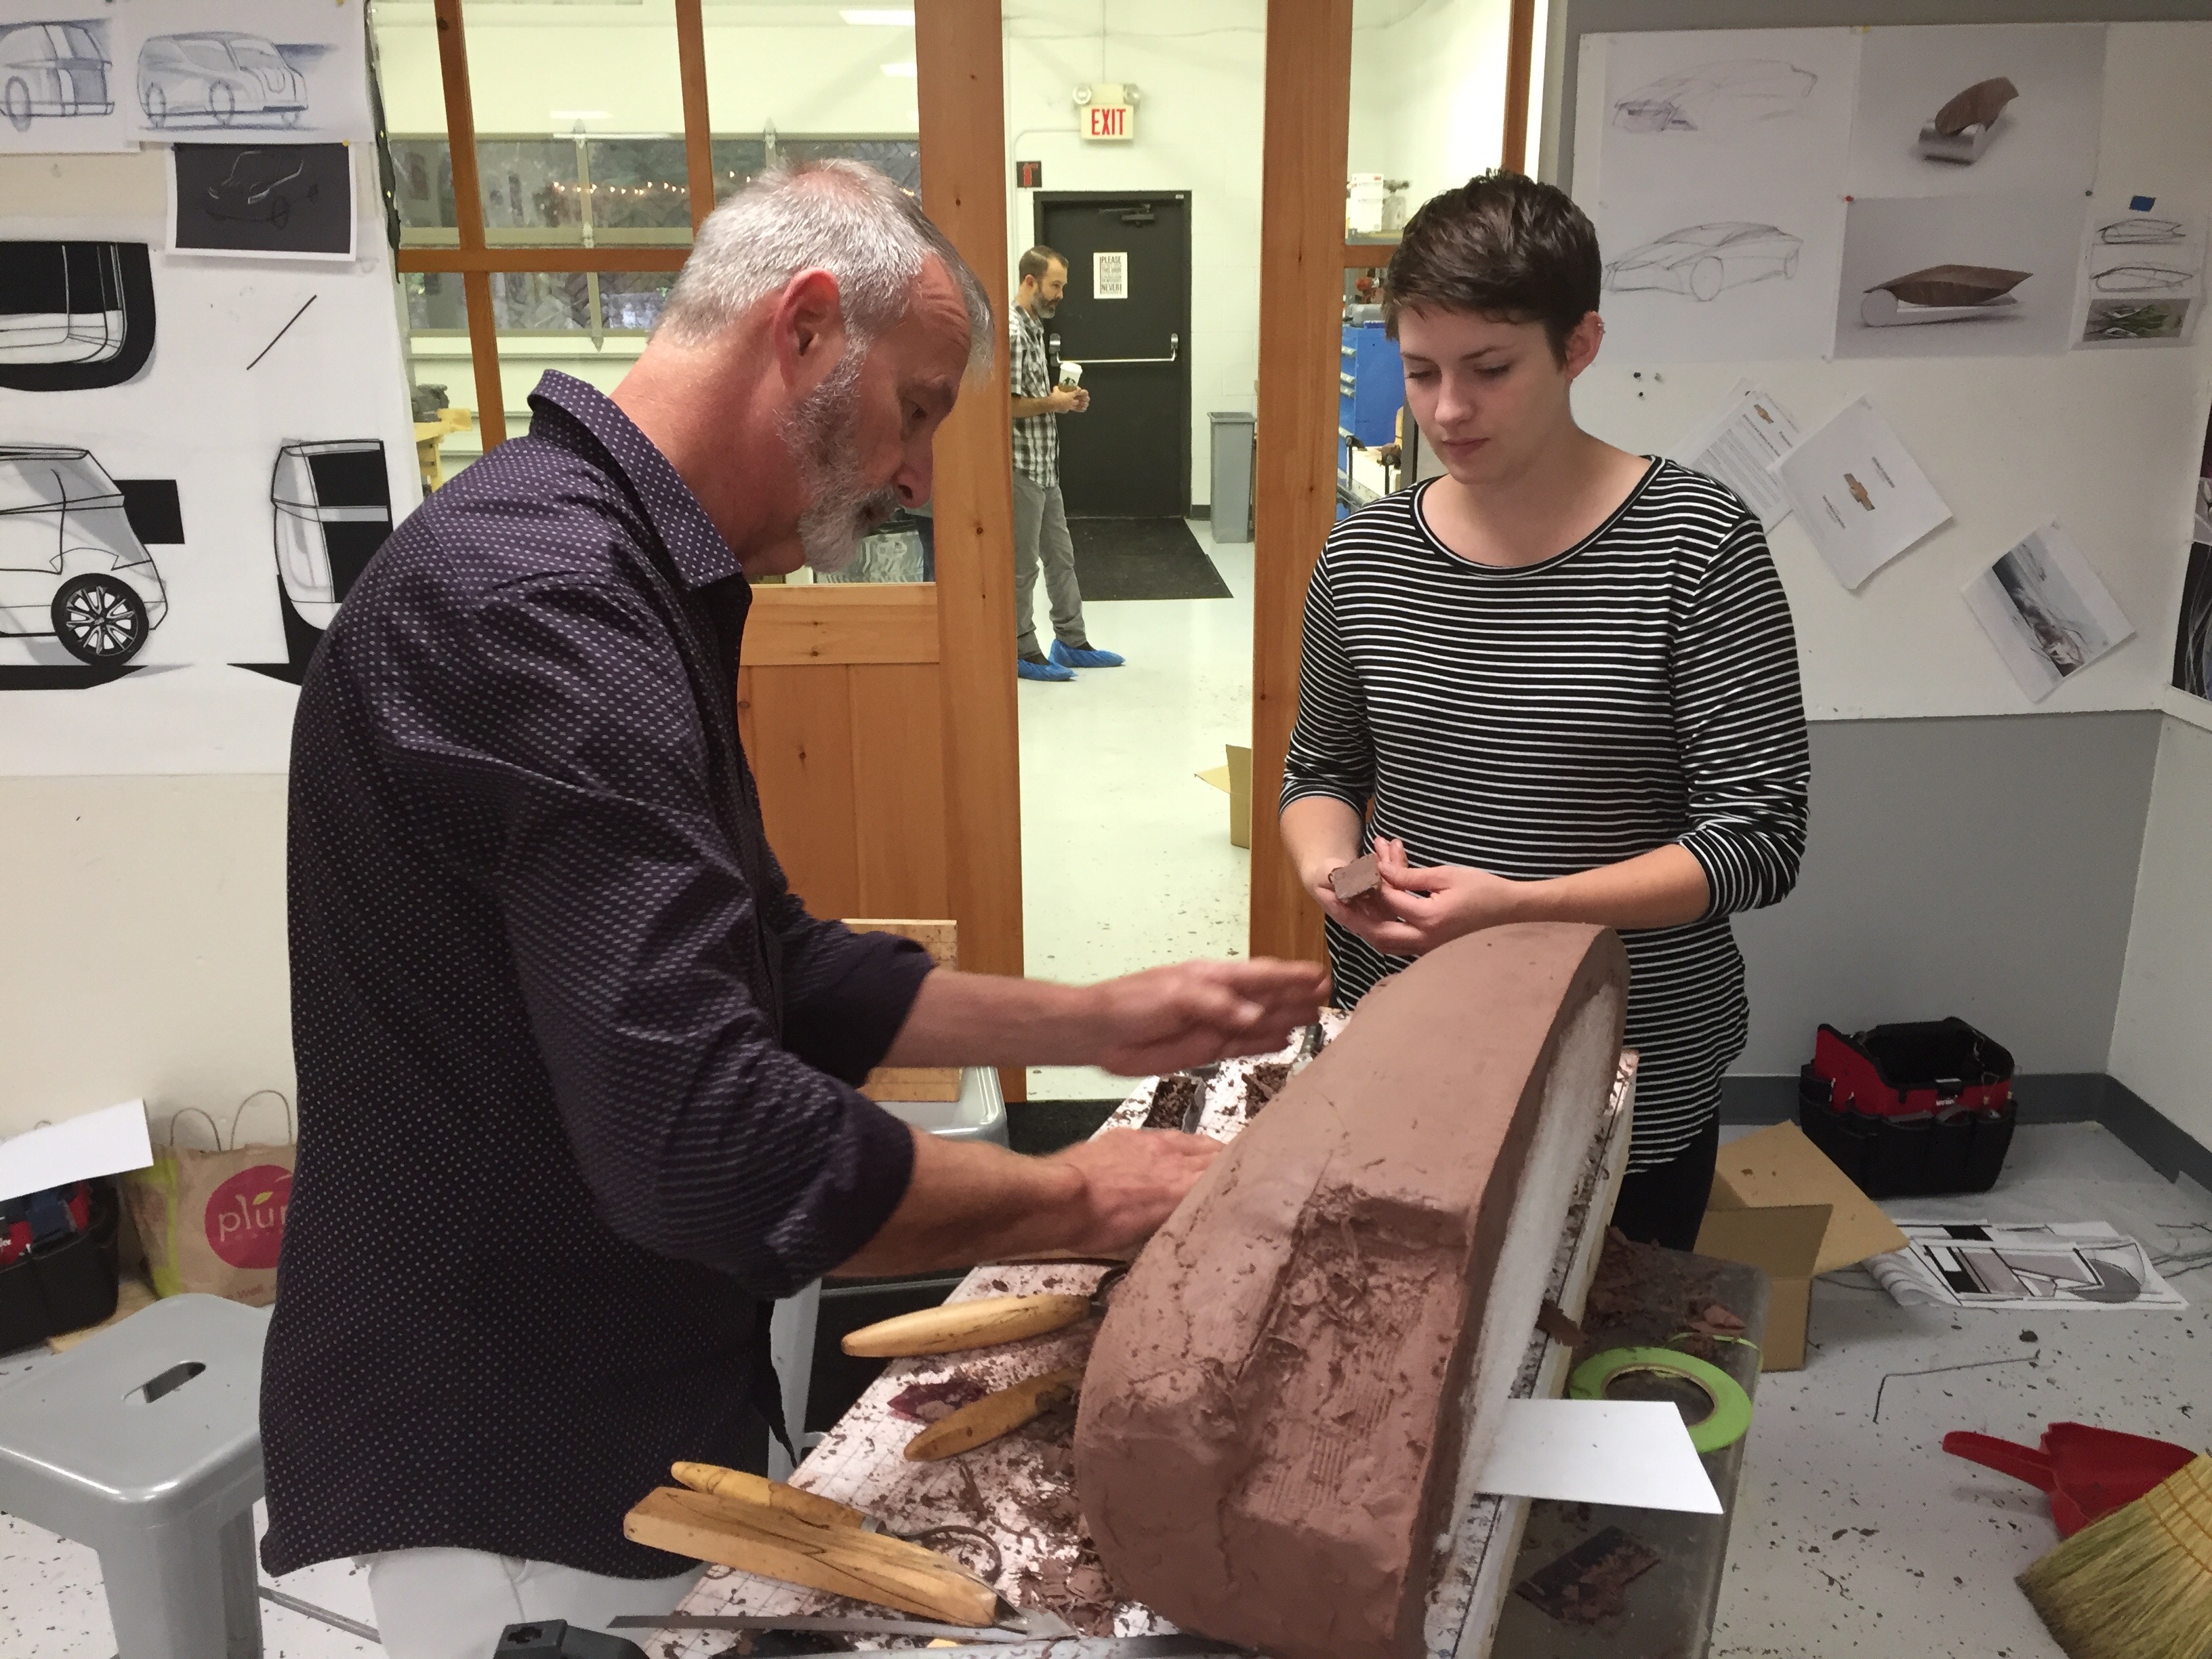 Don Grzebienik, clay sculptor for General Motors, works with Kadi Richardson from Cedarville University's Industrial and Innovative Design program. Cedarville's program is ranked No. 5 nationally according to CollegeValuesOnline.com.